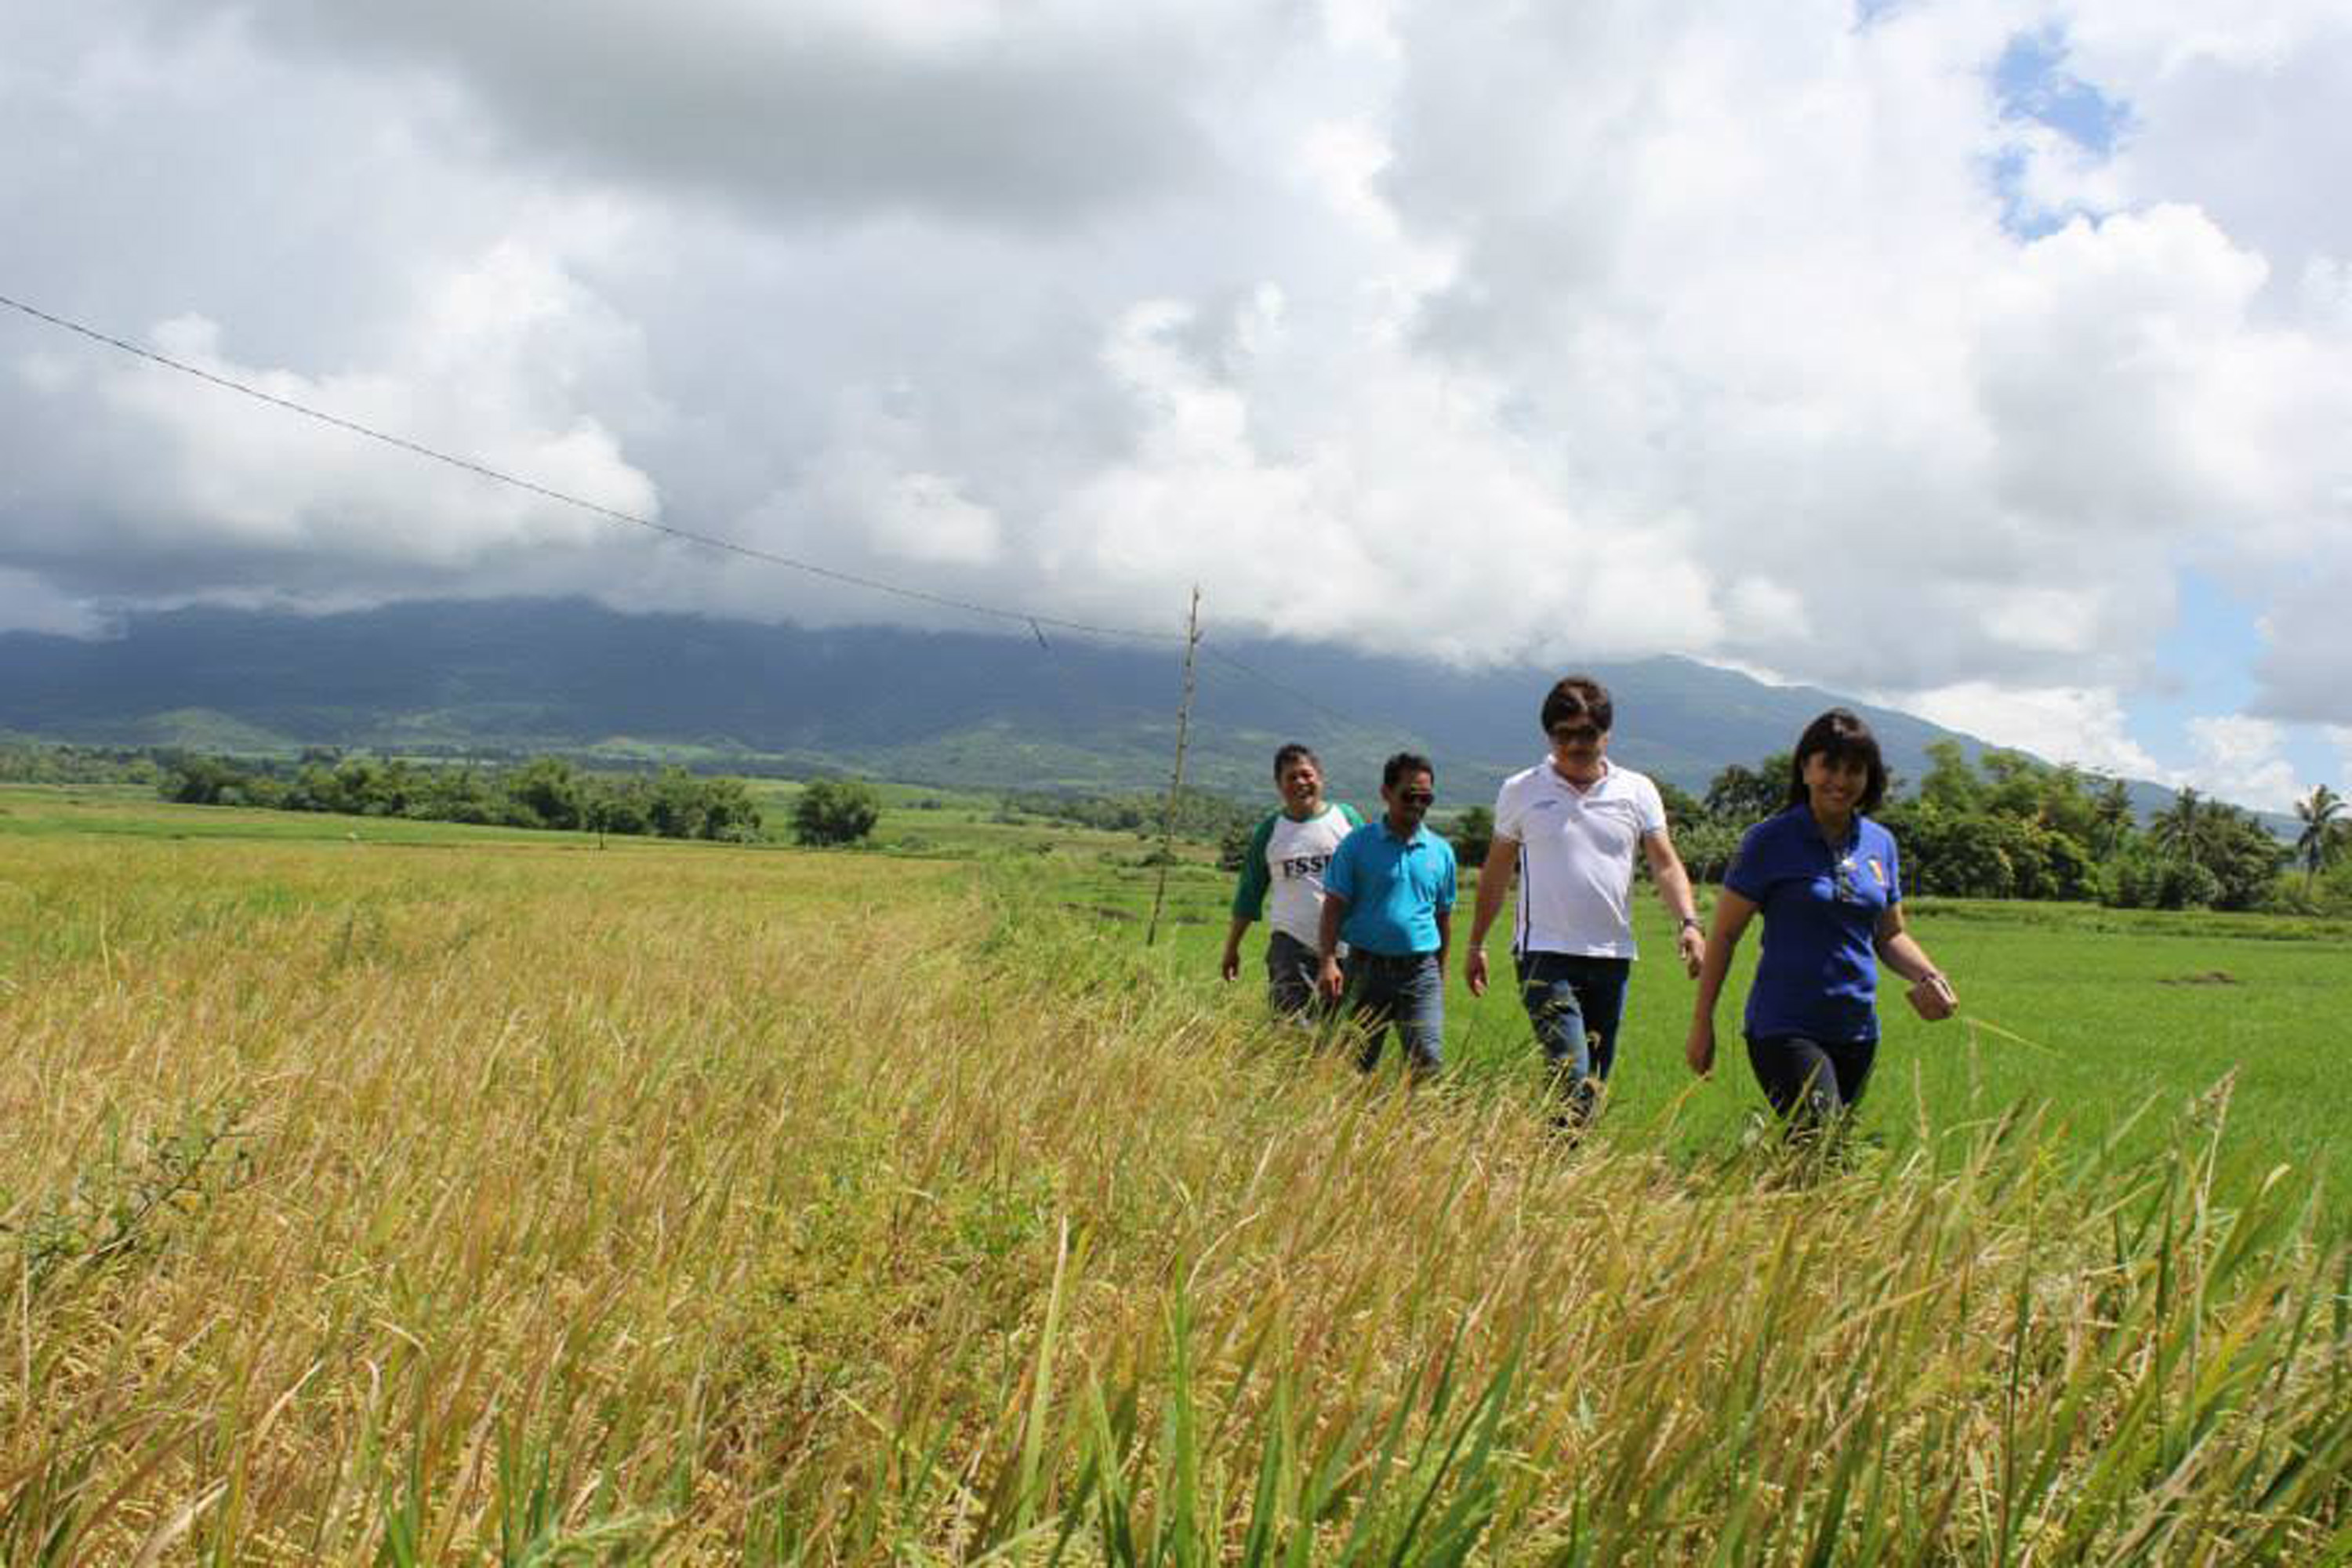 RURAL DEVELOPMENT. LP vice presidential bet Leni Robredo during a visit to her district in Naga. File photo by Rhaydz Barcia/Rappler  